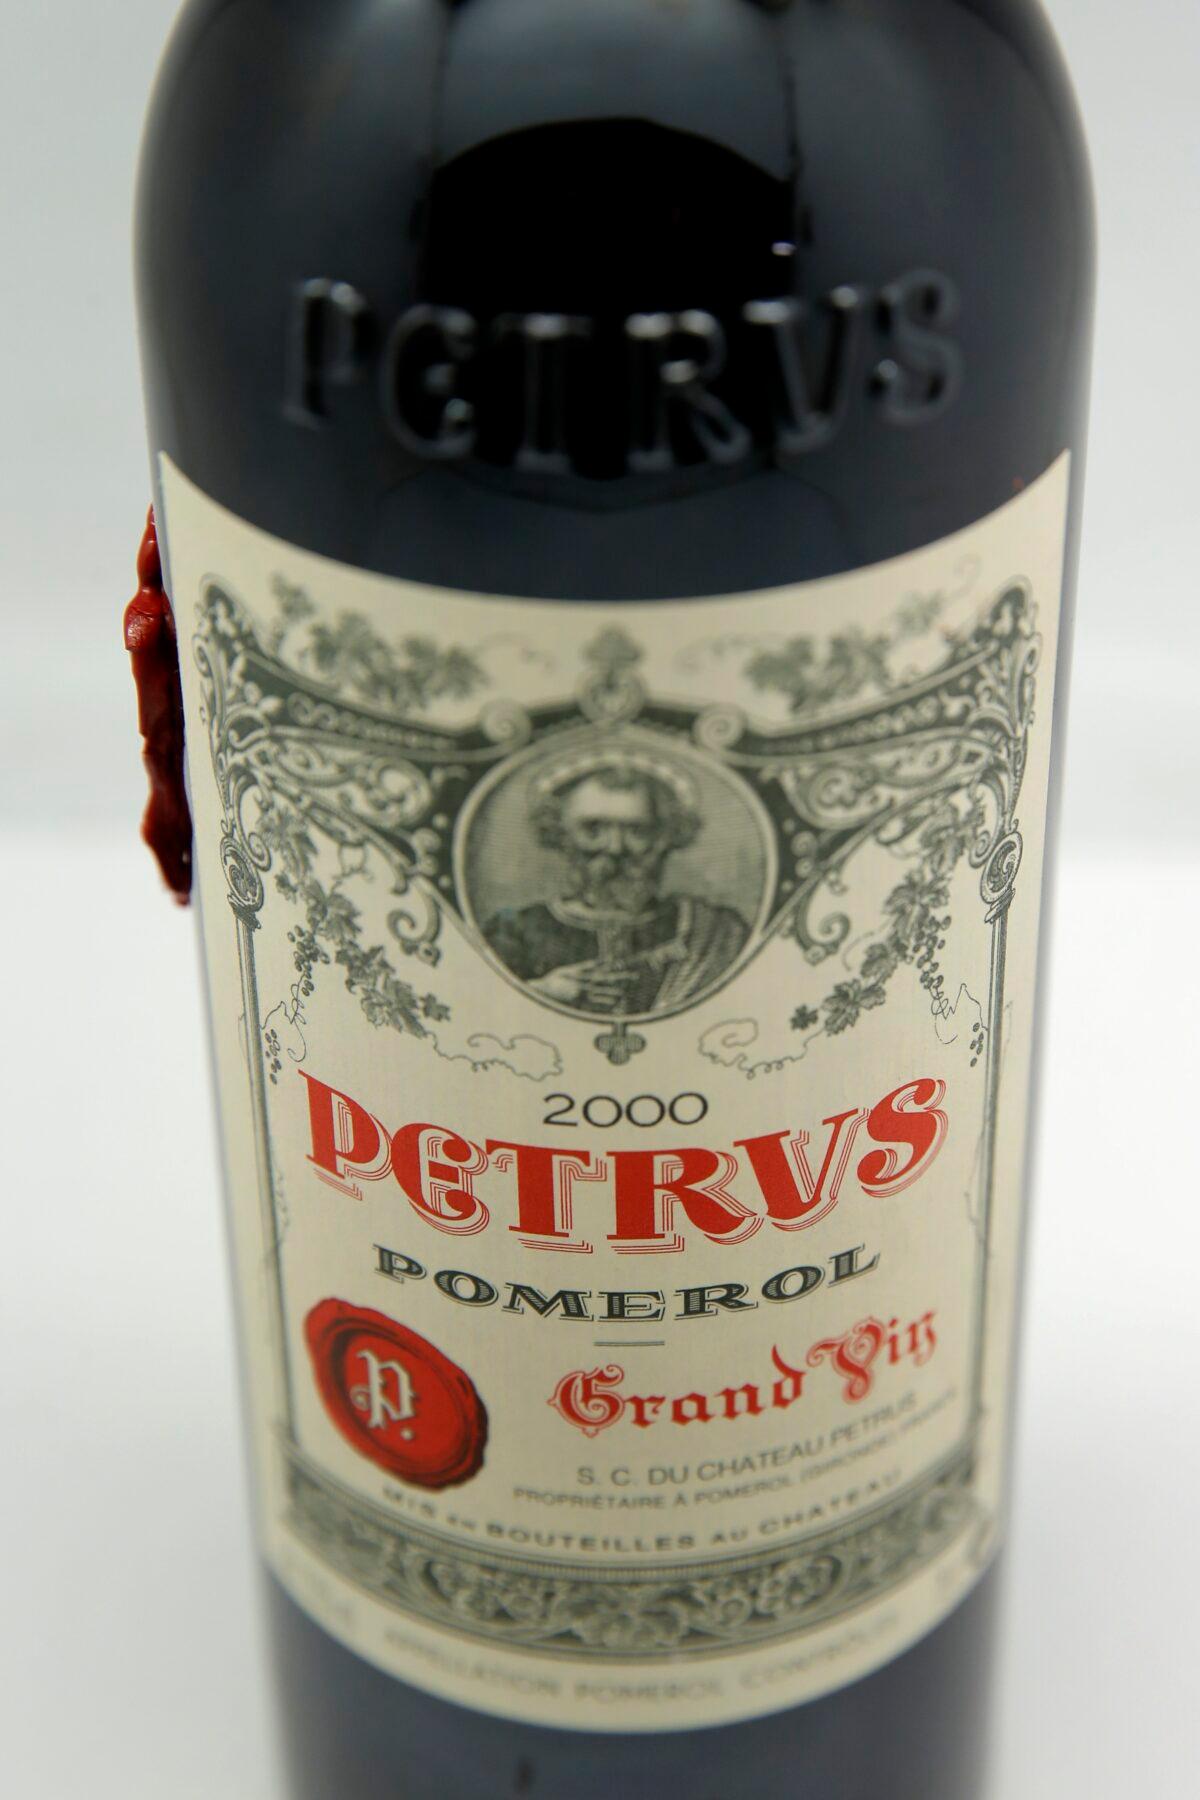 A bottle of Petrus red wine that spent a year orbiting the world in the International Space Station is pictured in Paris, on May 3, 2021. (Christophe Ena/AP Photo)